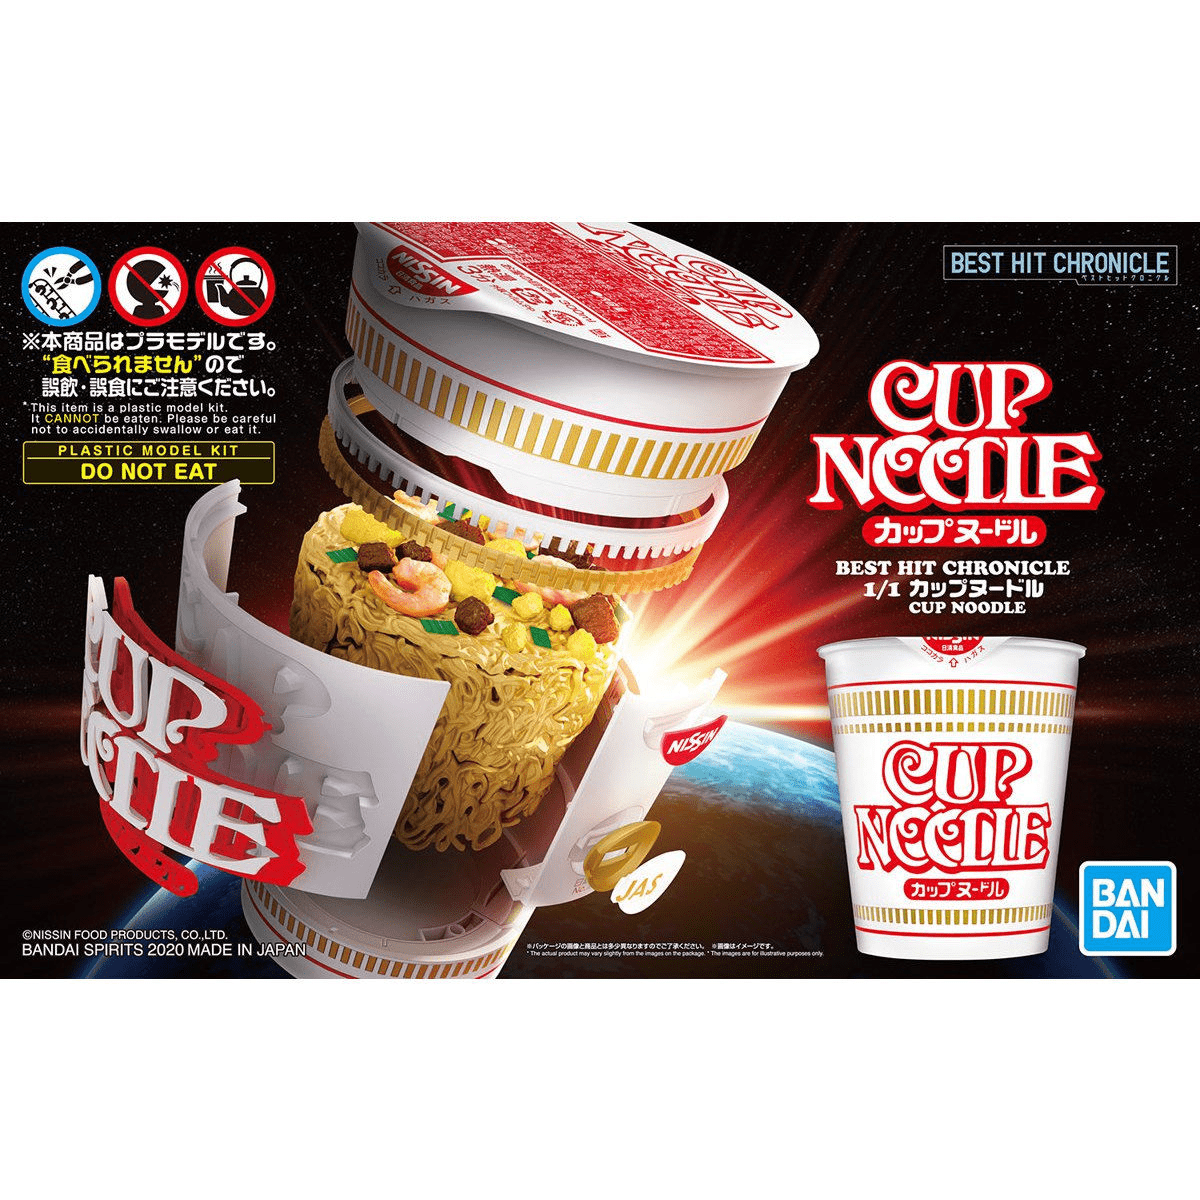 Bandai - 1/1 BEST HIT CHRONICLE CUP NOODLE Model Kit - Good Game Anime